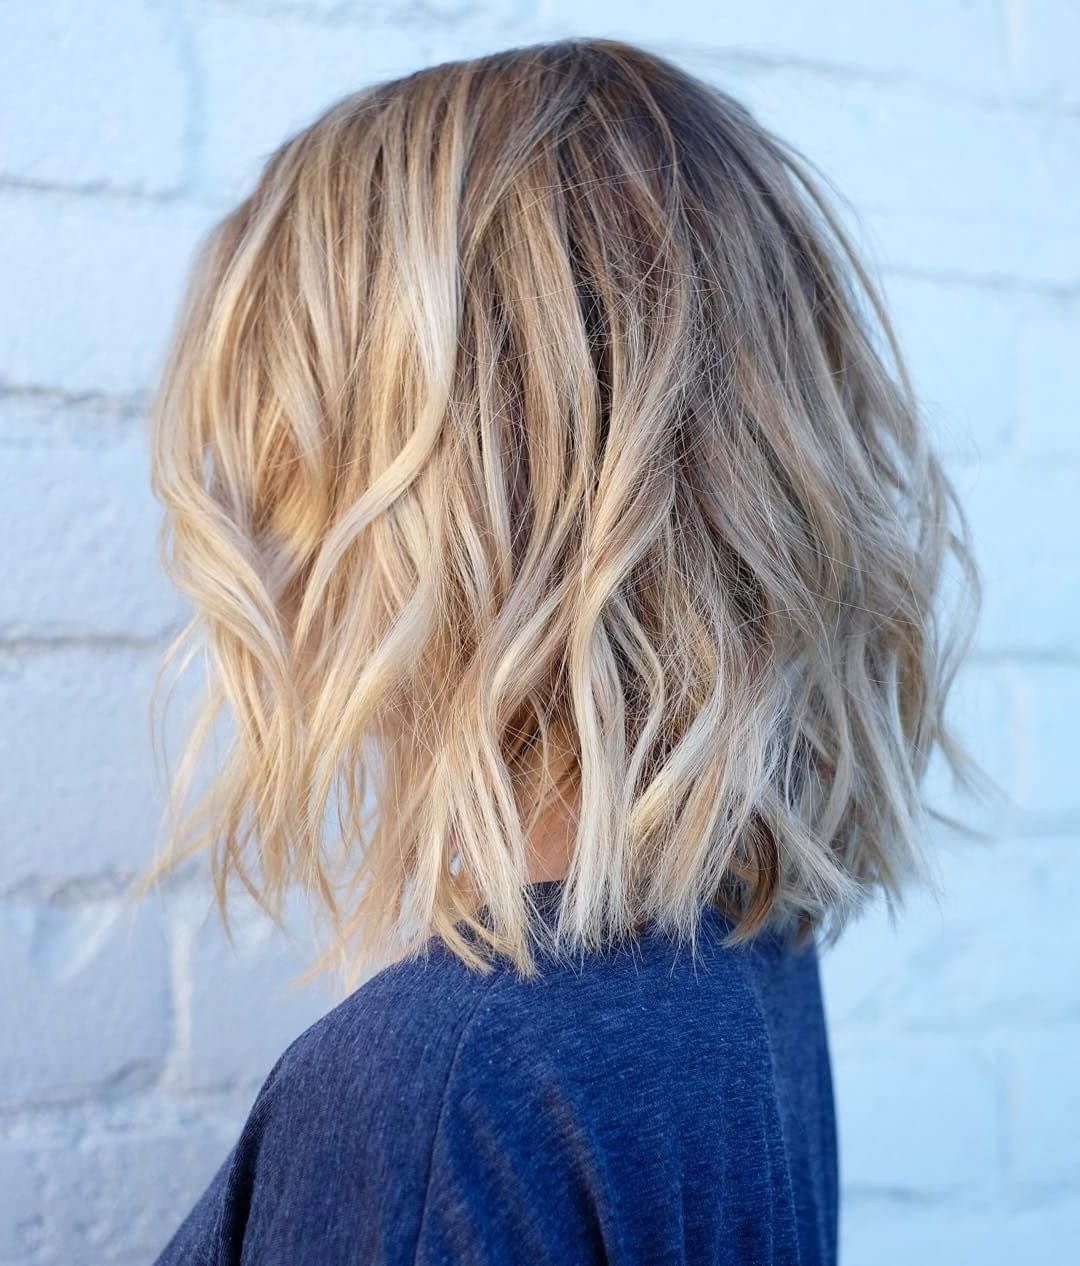 50 Fresh Short Blonde Hair Ideas To Update Your Style In 2018 Regarding Fashionable Icy Waves And Angled Blonde Hairstyles (View 11 of 20)